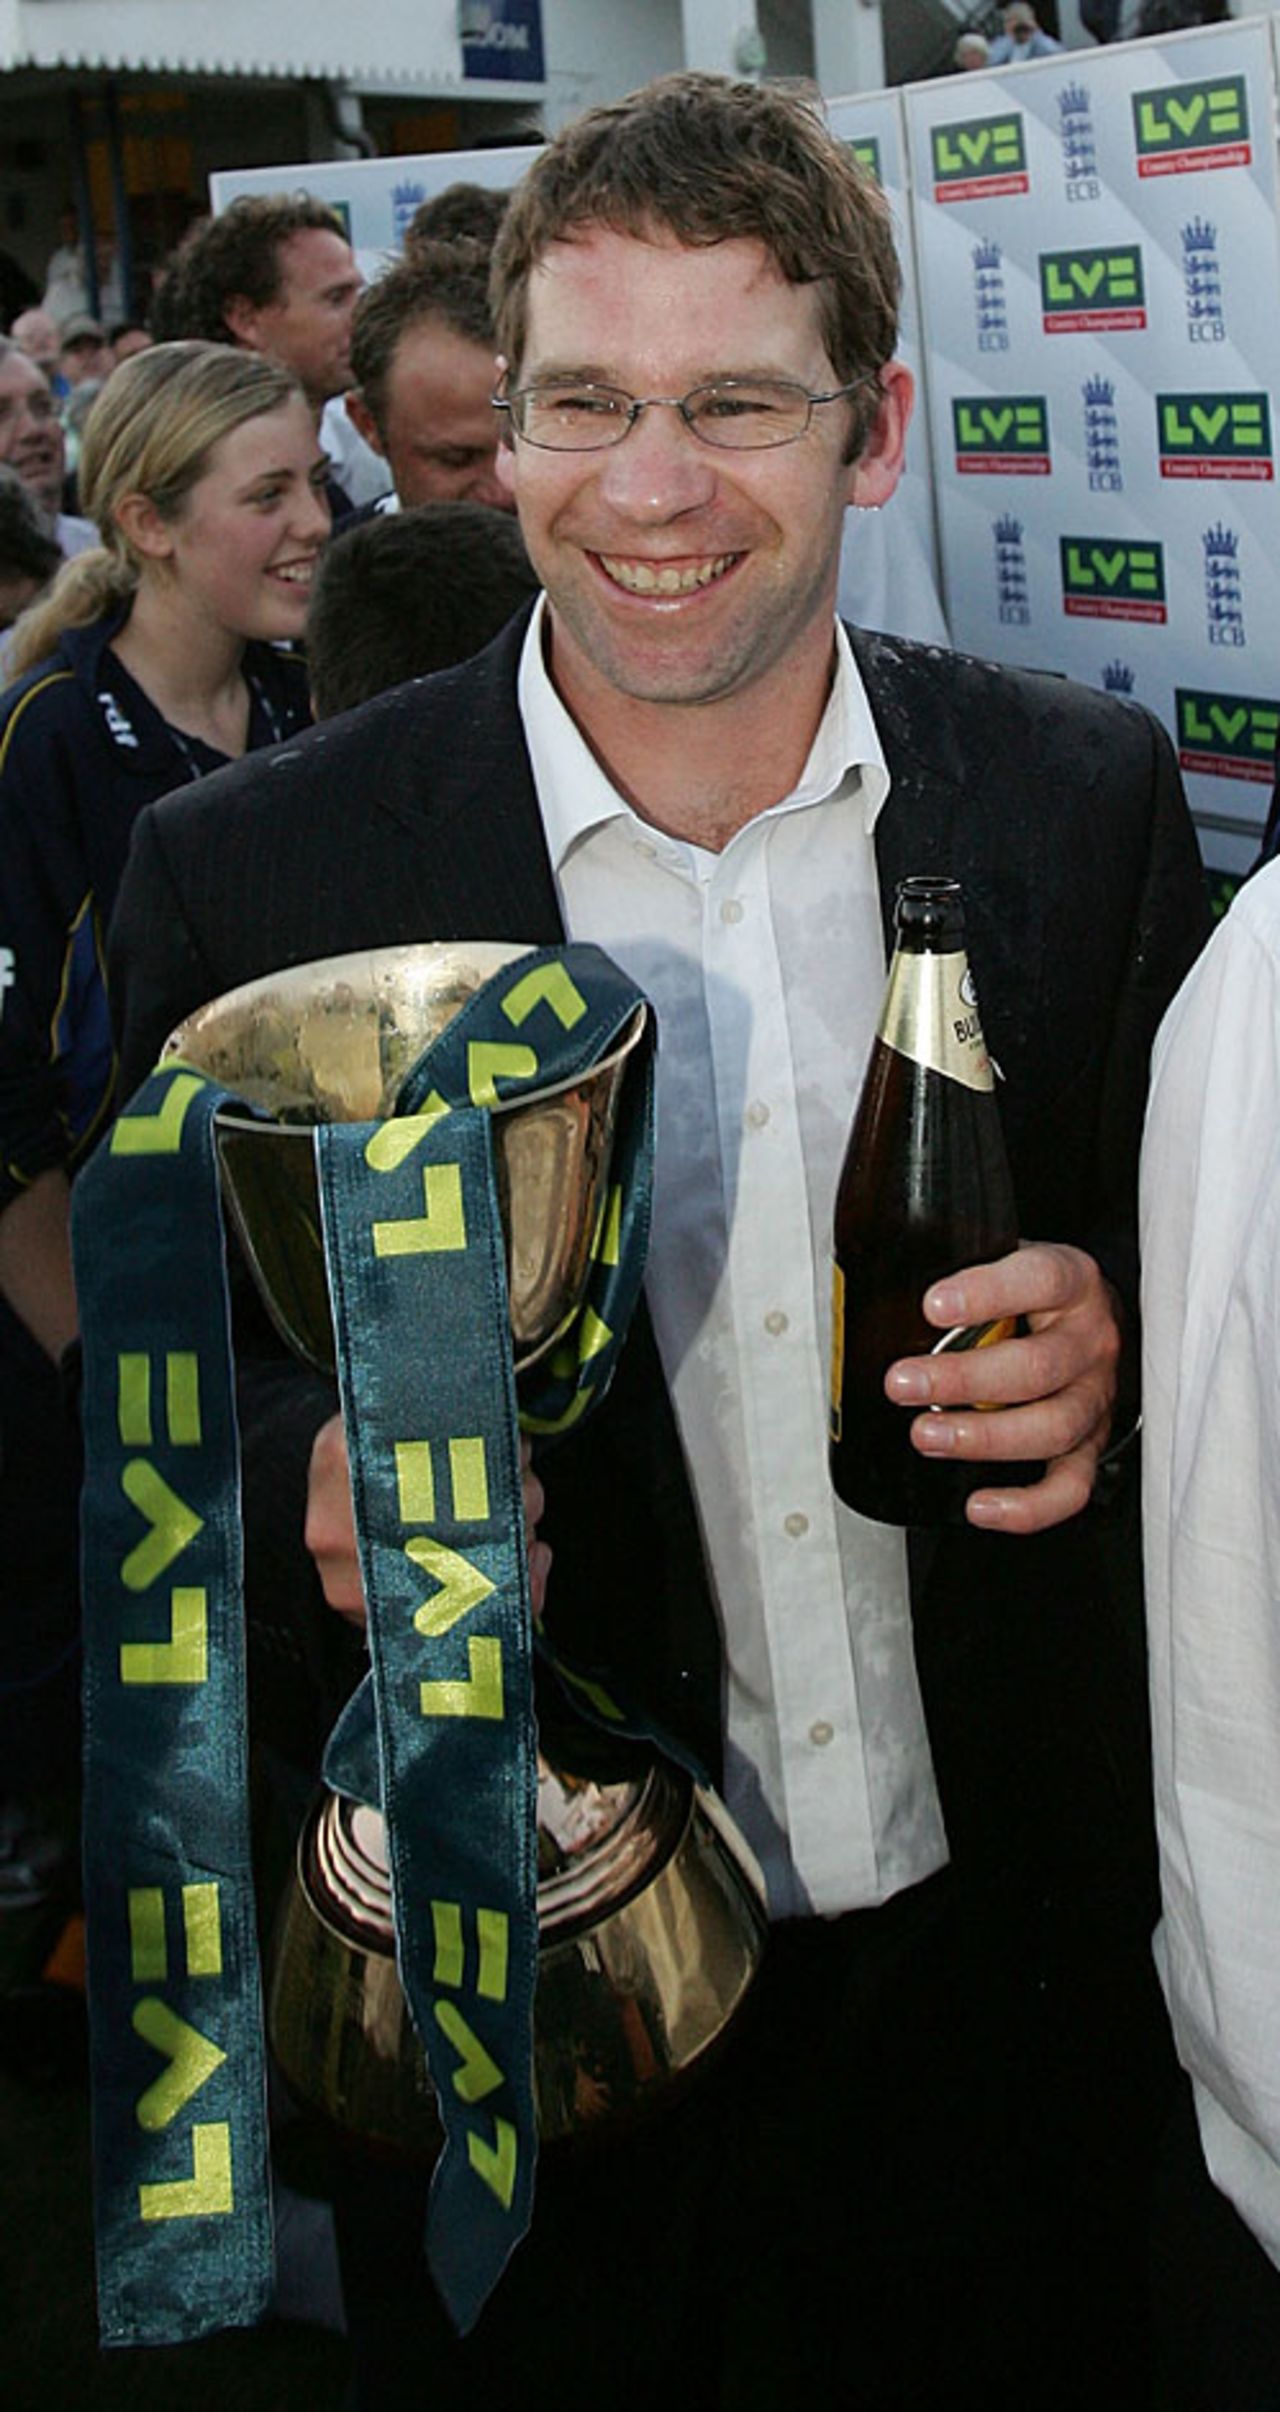 Richard Montgomerie with the Championship trophy, Sussex v Worcestershire, Hove, September 21, 2007 